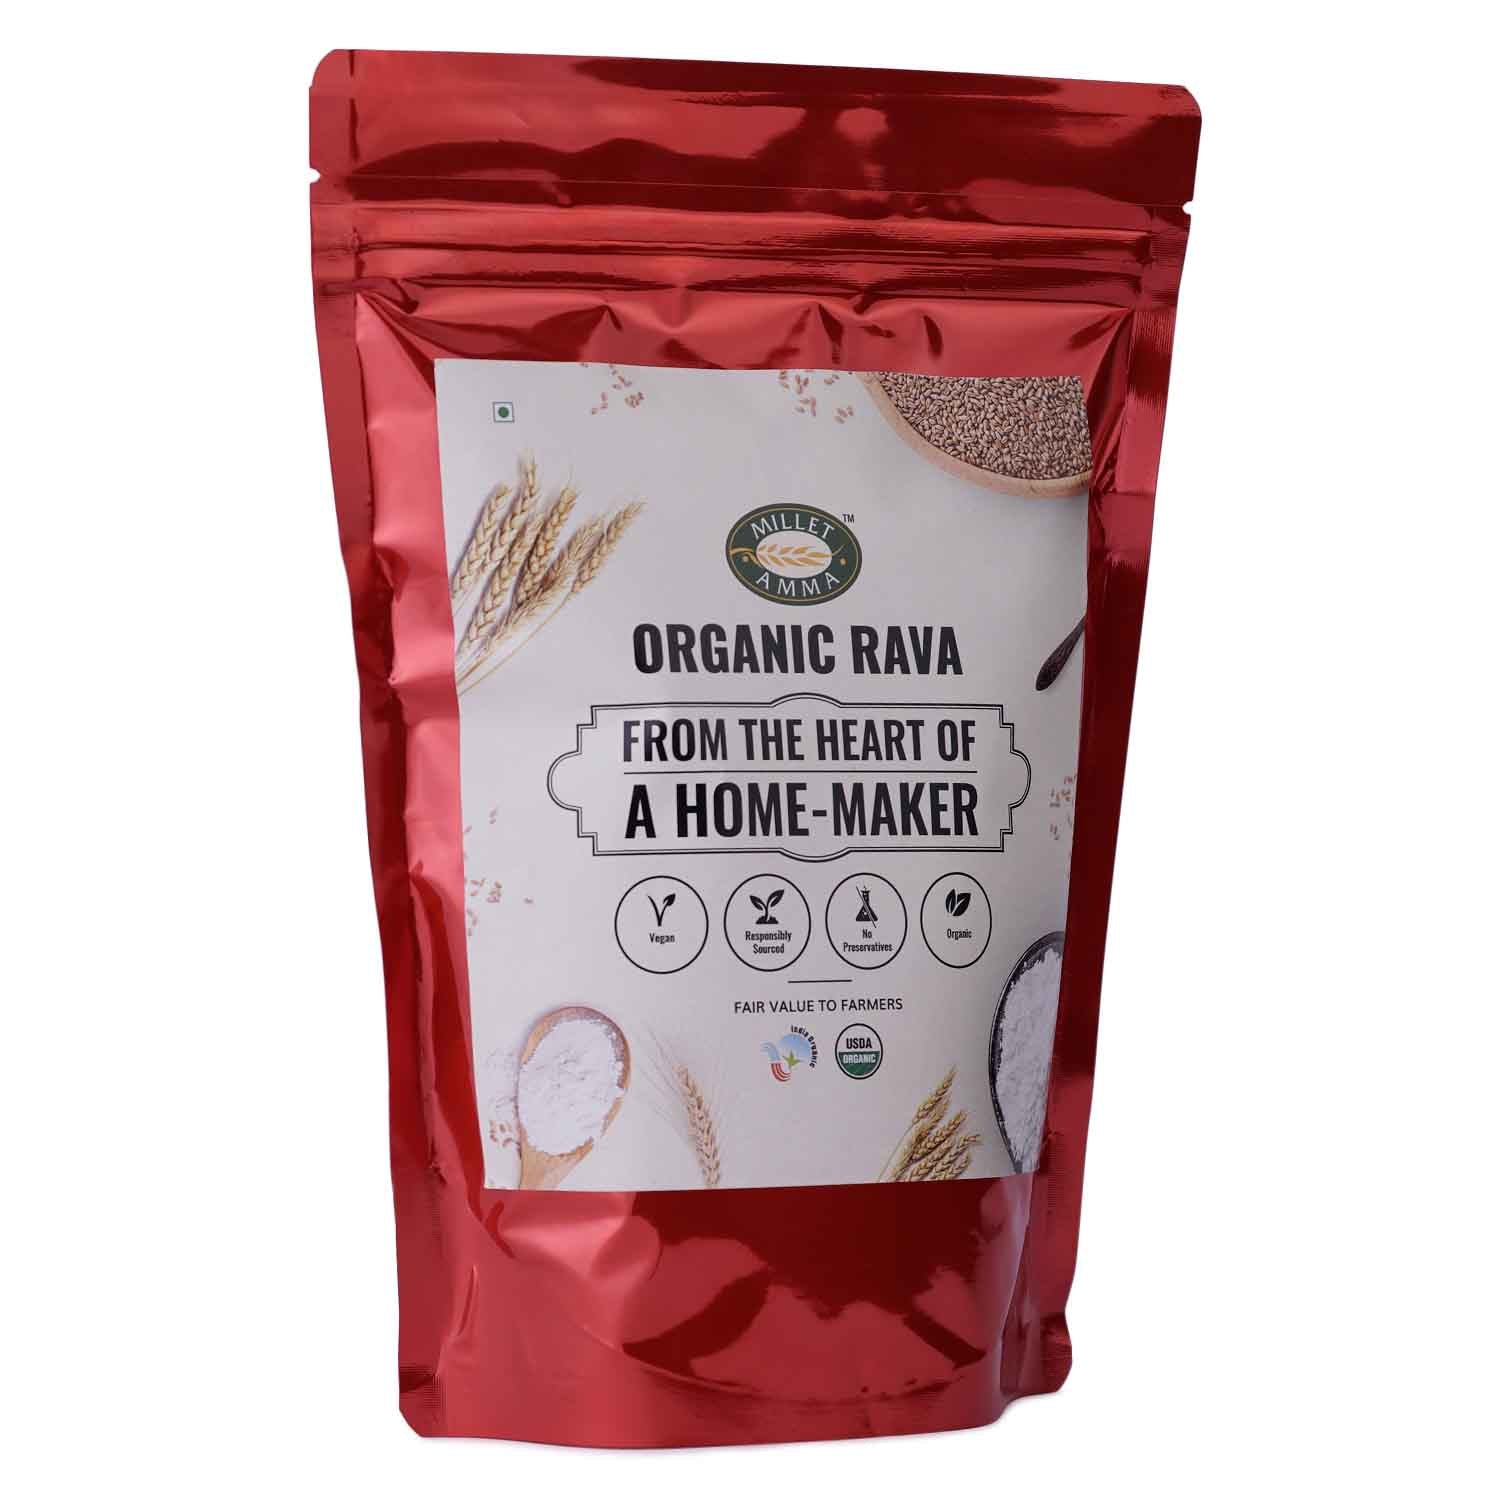 Milletamma’s Khapli wheat Dalia contains good amount of iron that helps in curing anaemia.  It is rich in Zinc that helps you in getting glowing skin.  Since it contains low amount of gluten, it does not cause any digestive problems.